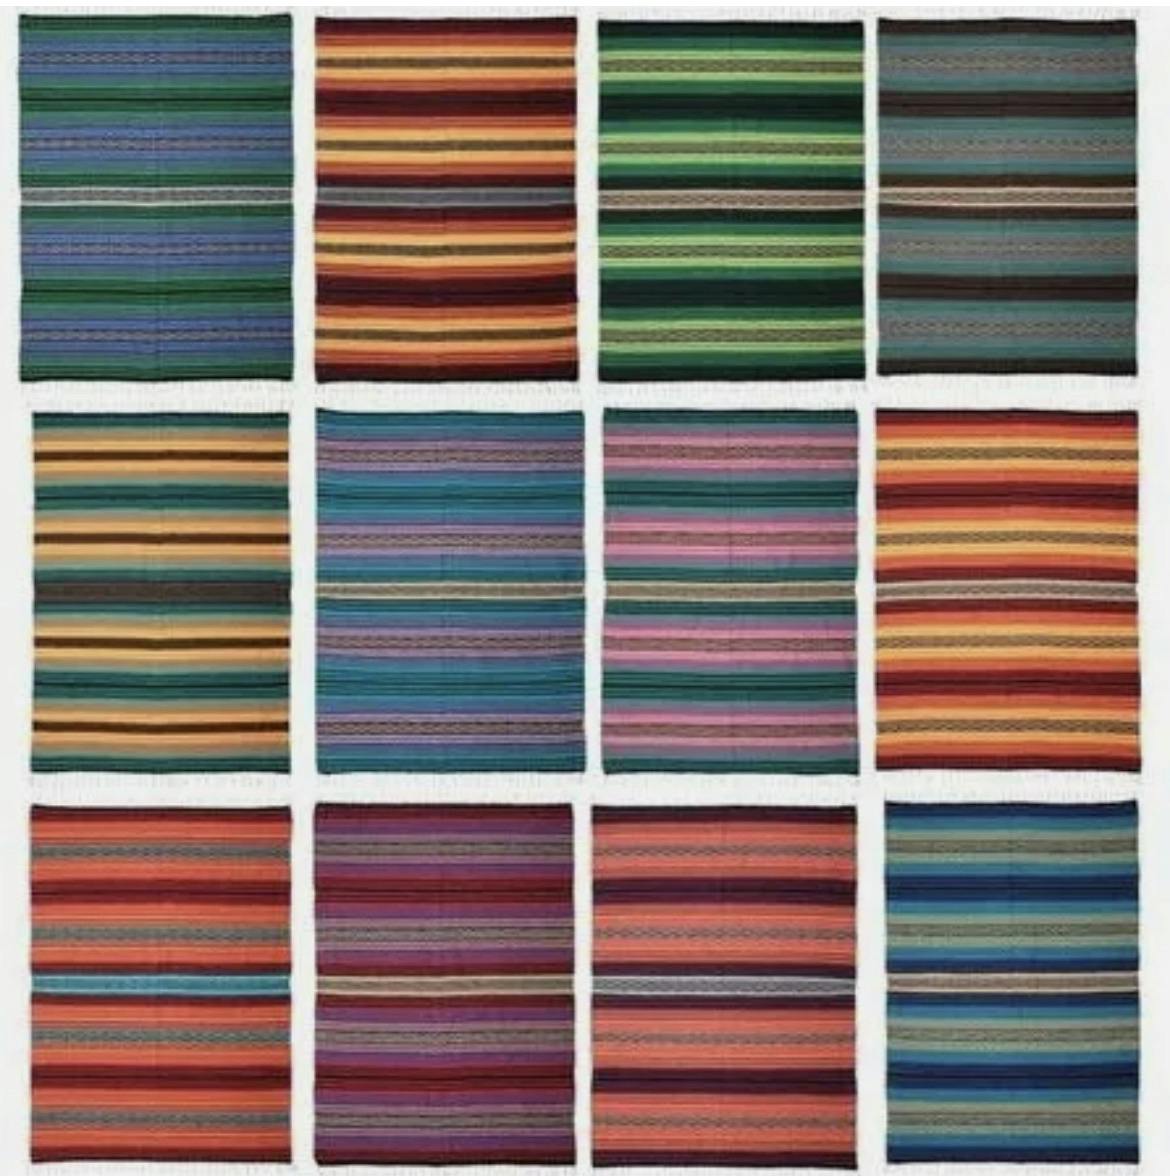 Southwestern Blankets- various prices